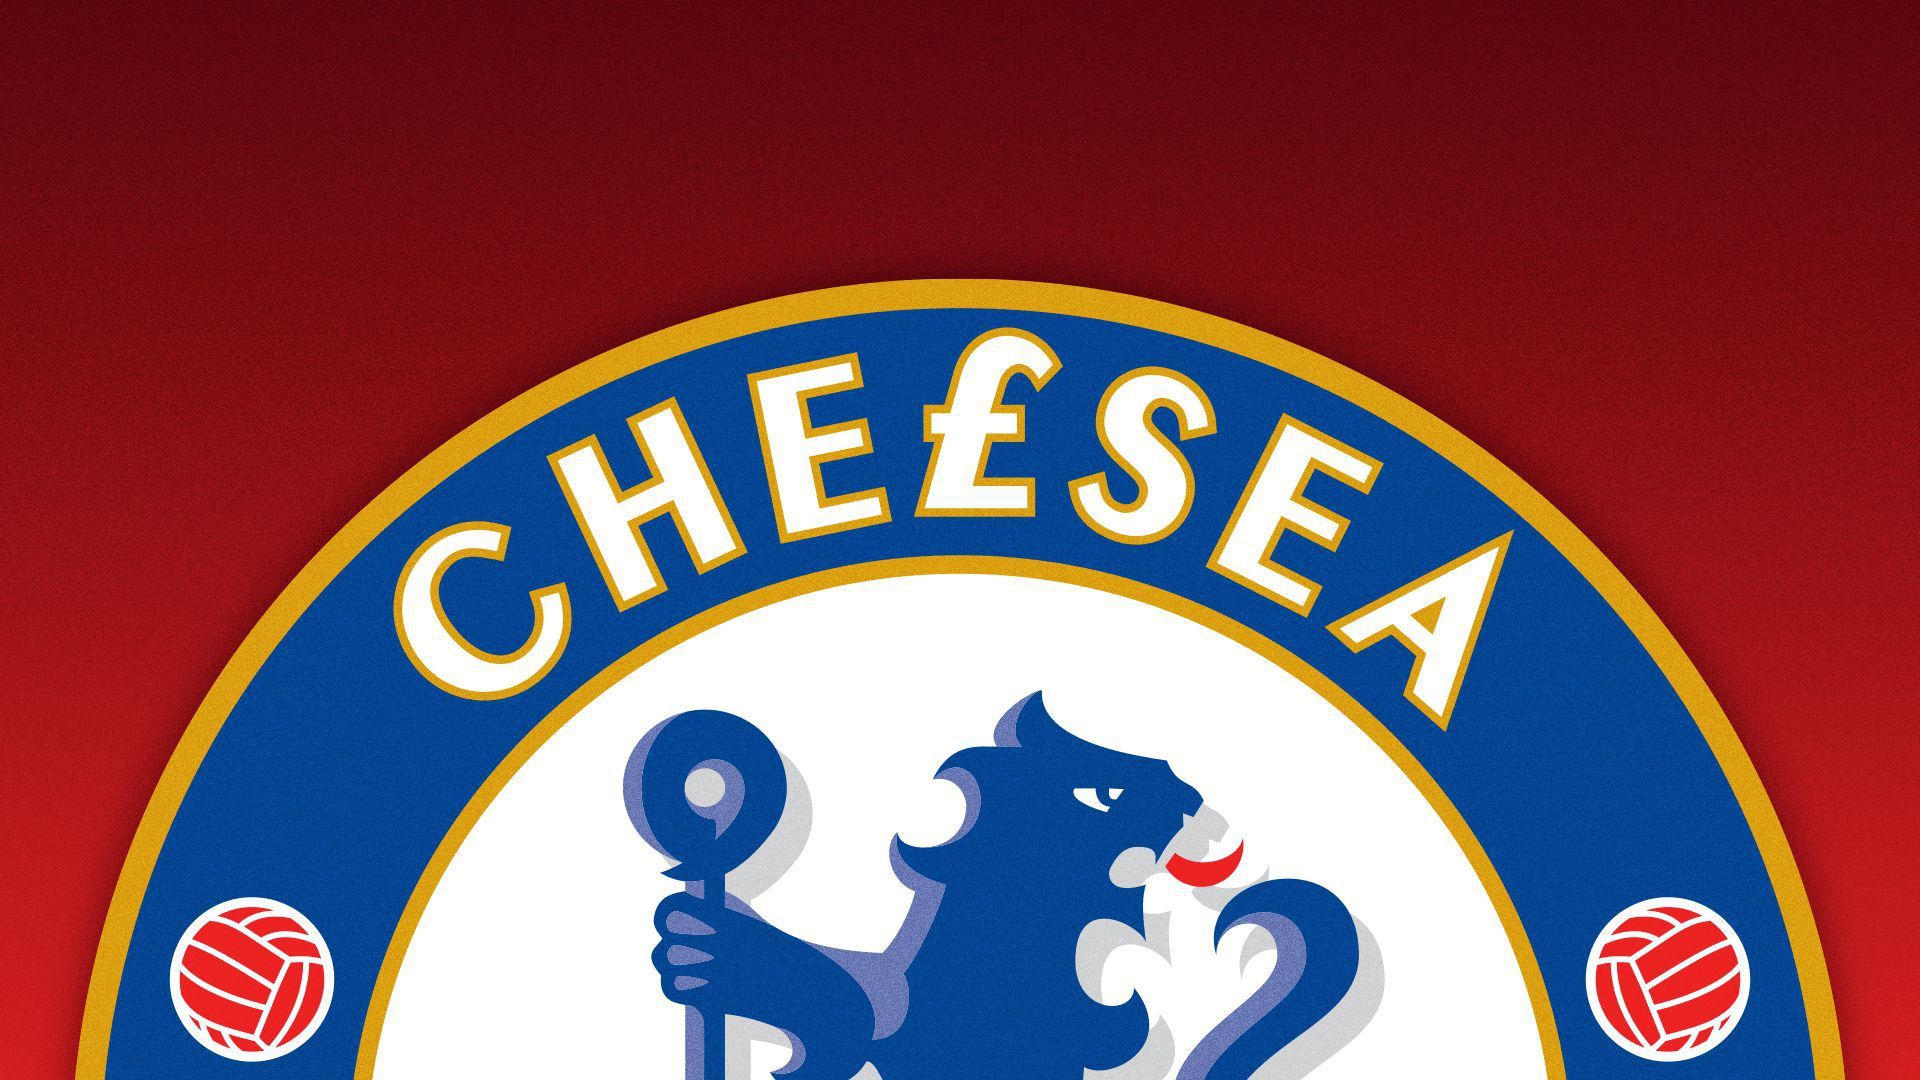 A Chelsea FC logo with a pound sign instead of an L